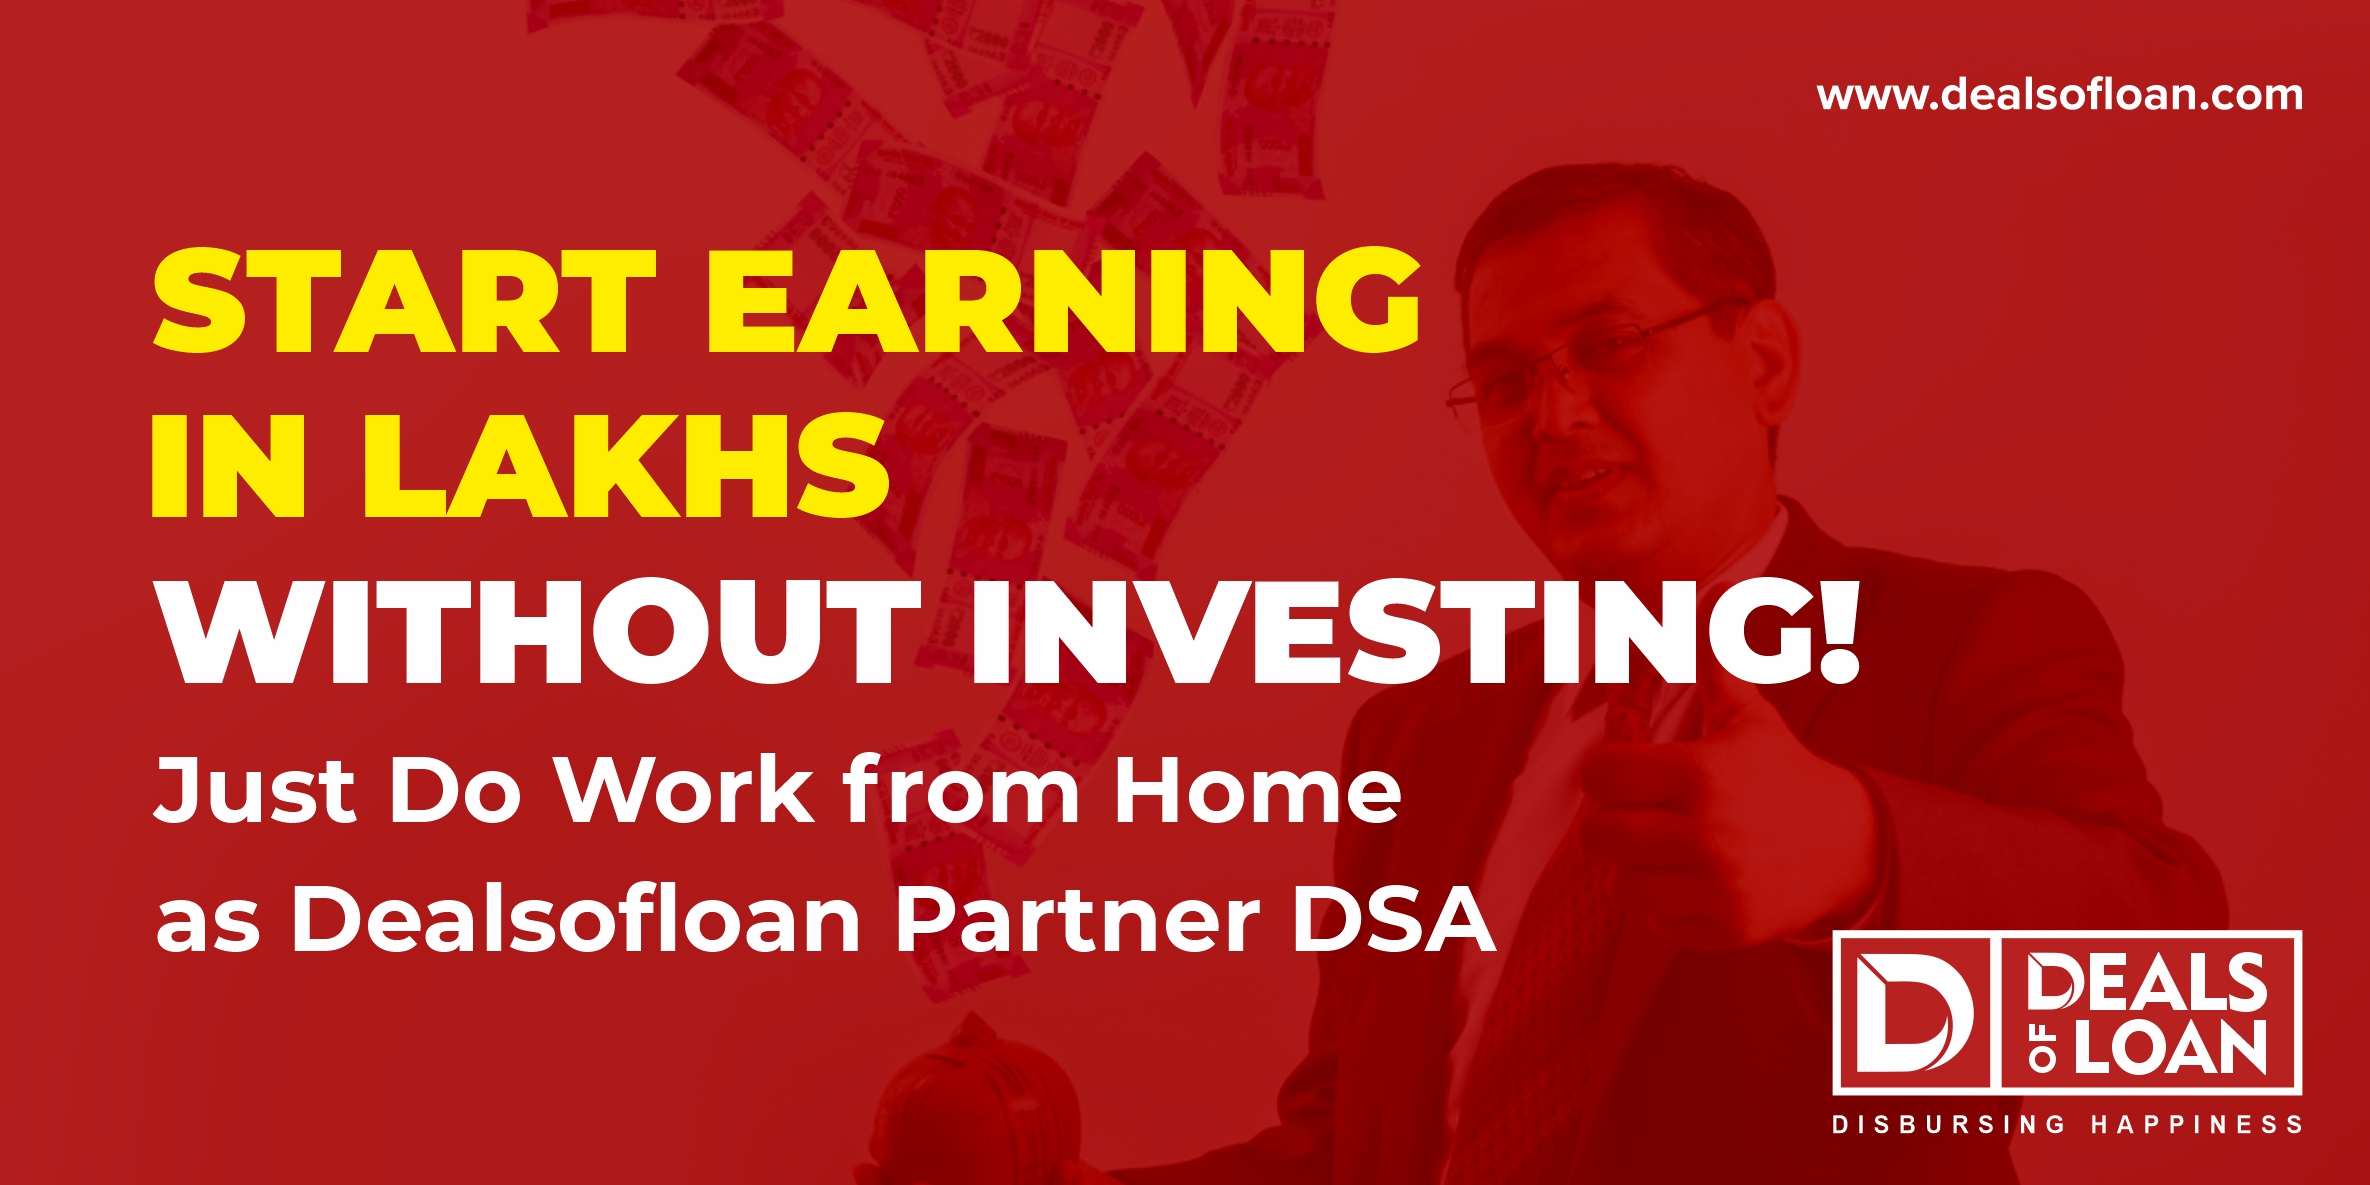 Start Earning in Lakhs without Investing Just Do Work from Home as Dealsofloan Partner DSA 